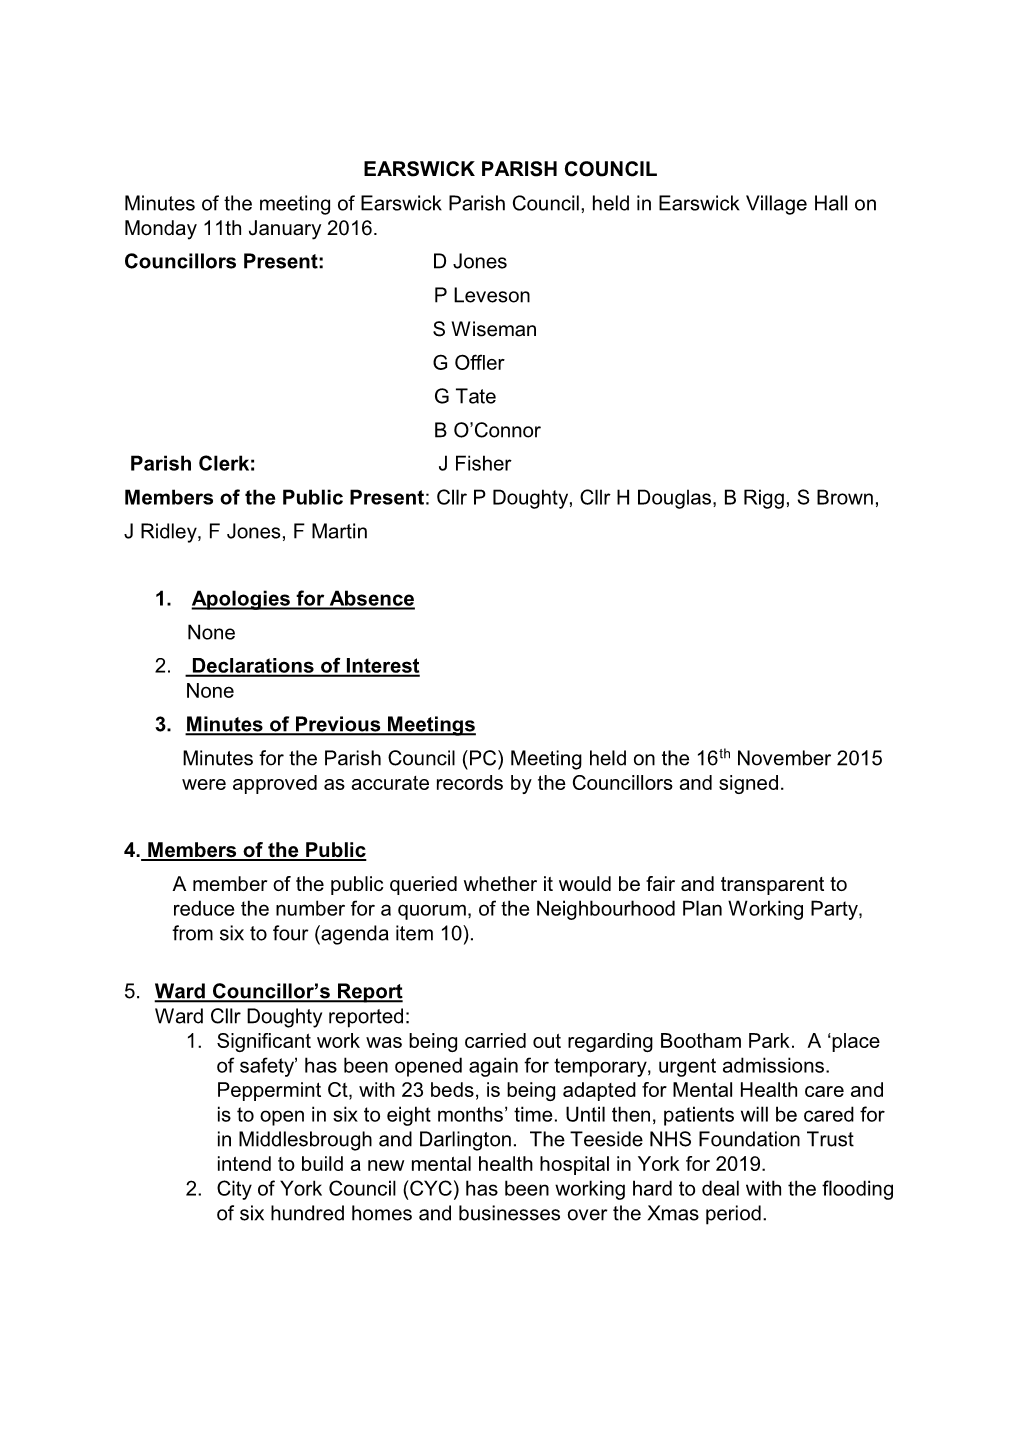 EARSWICK PARISH COUNCIL Minutes of the Meeting of Earswick Parish Council, Held in Earswick Village Hall on Monday 11Th January 2016